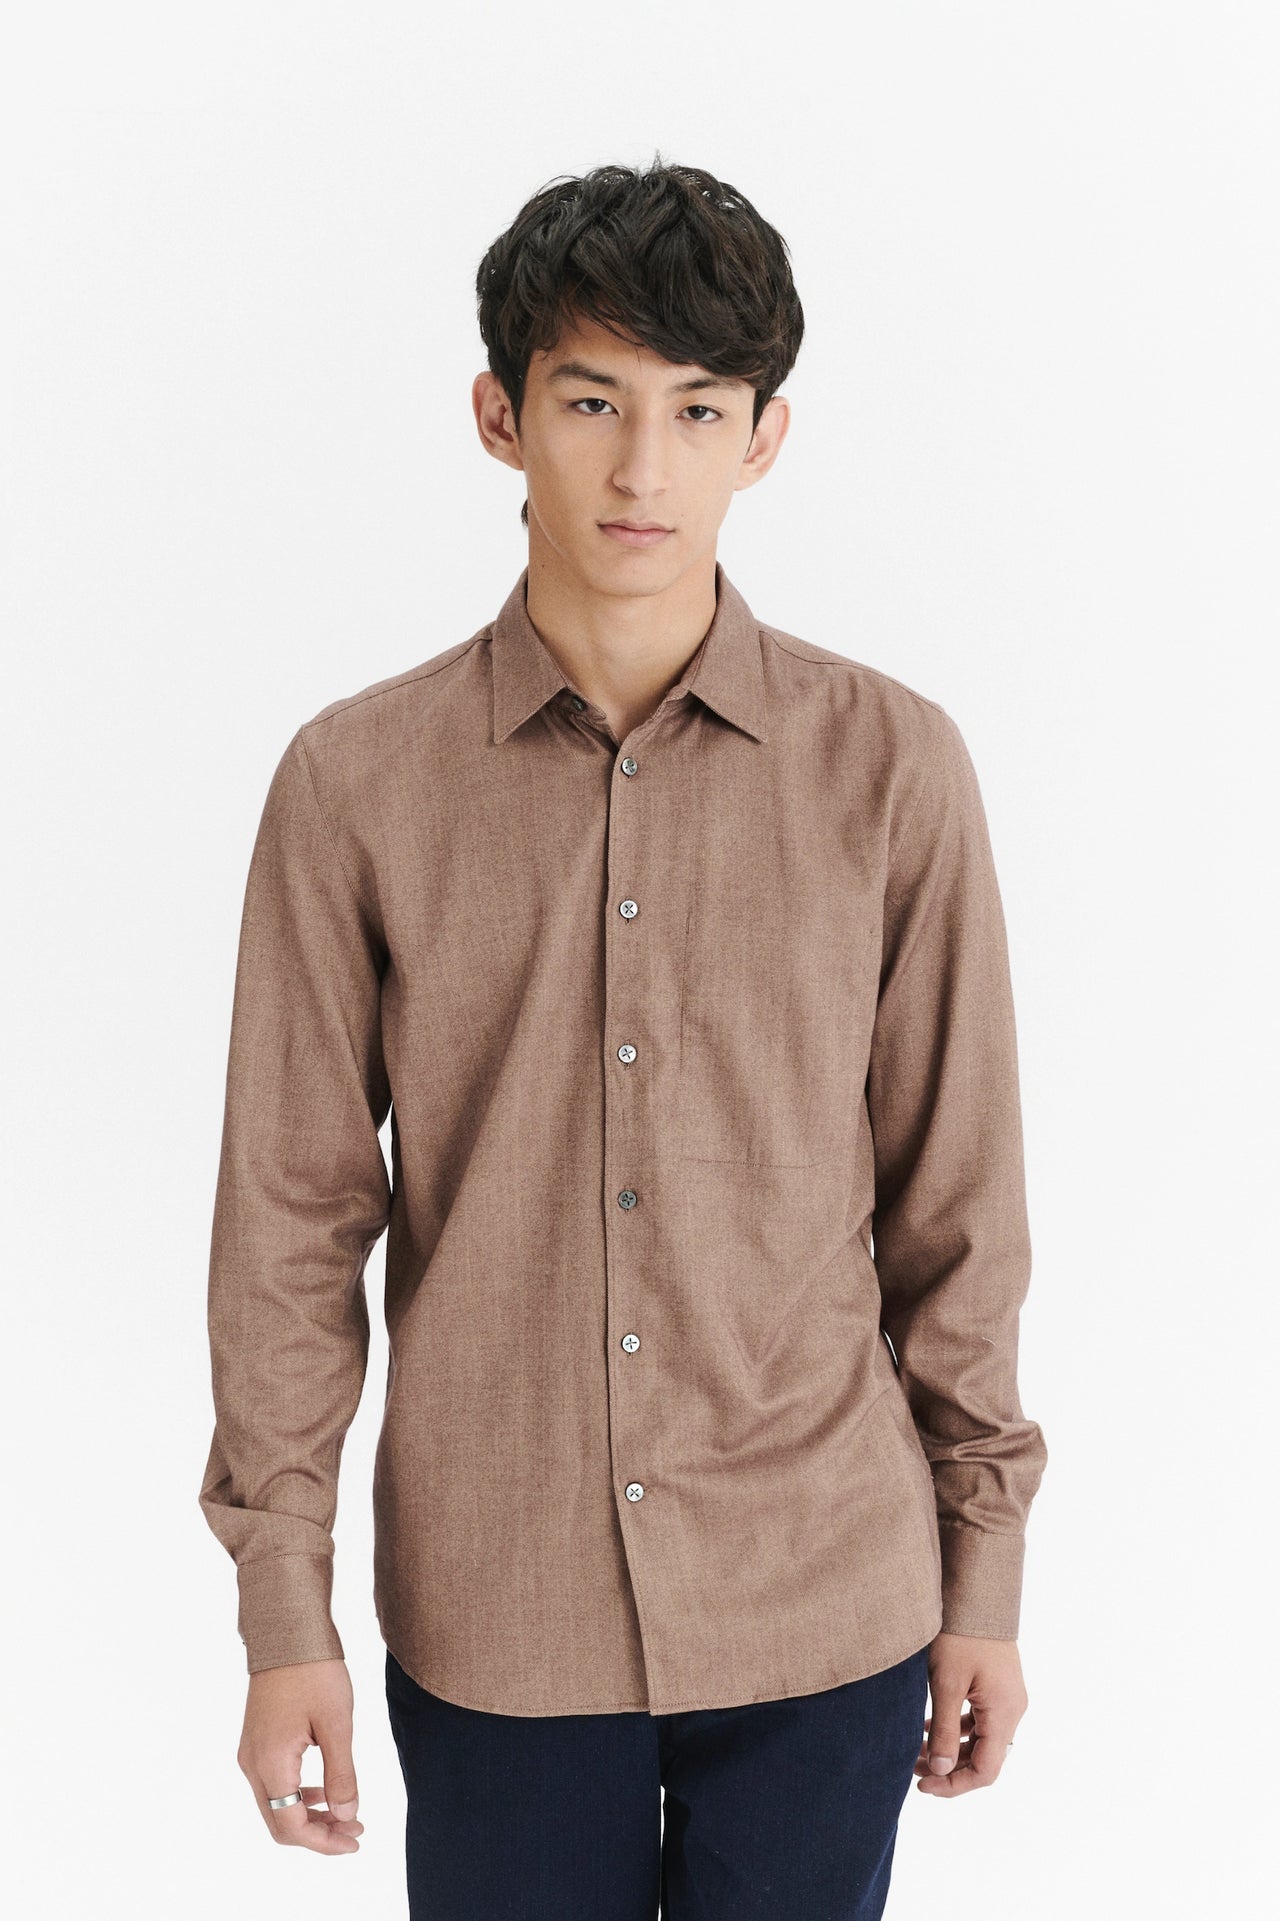 Feel Good Shirt in a Cinnamon Soft Italian Cotton and Lyocell Flannel